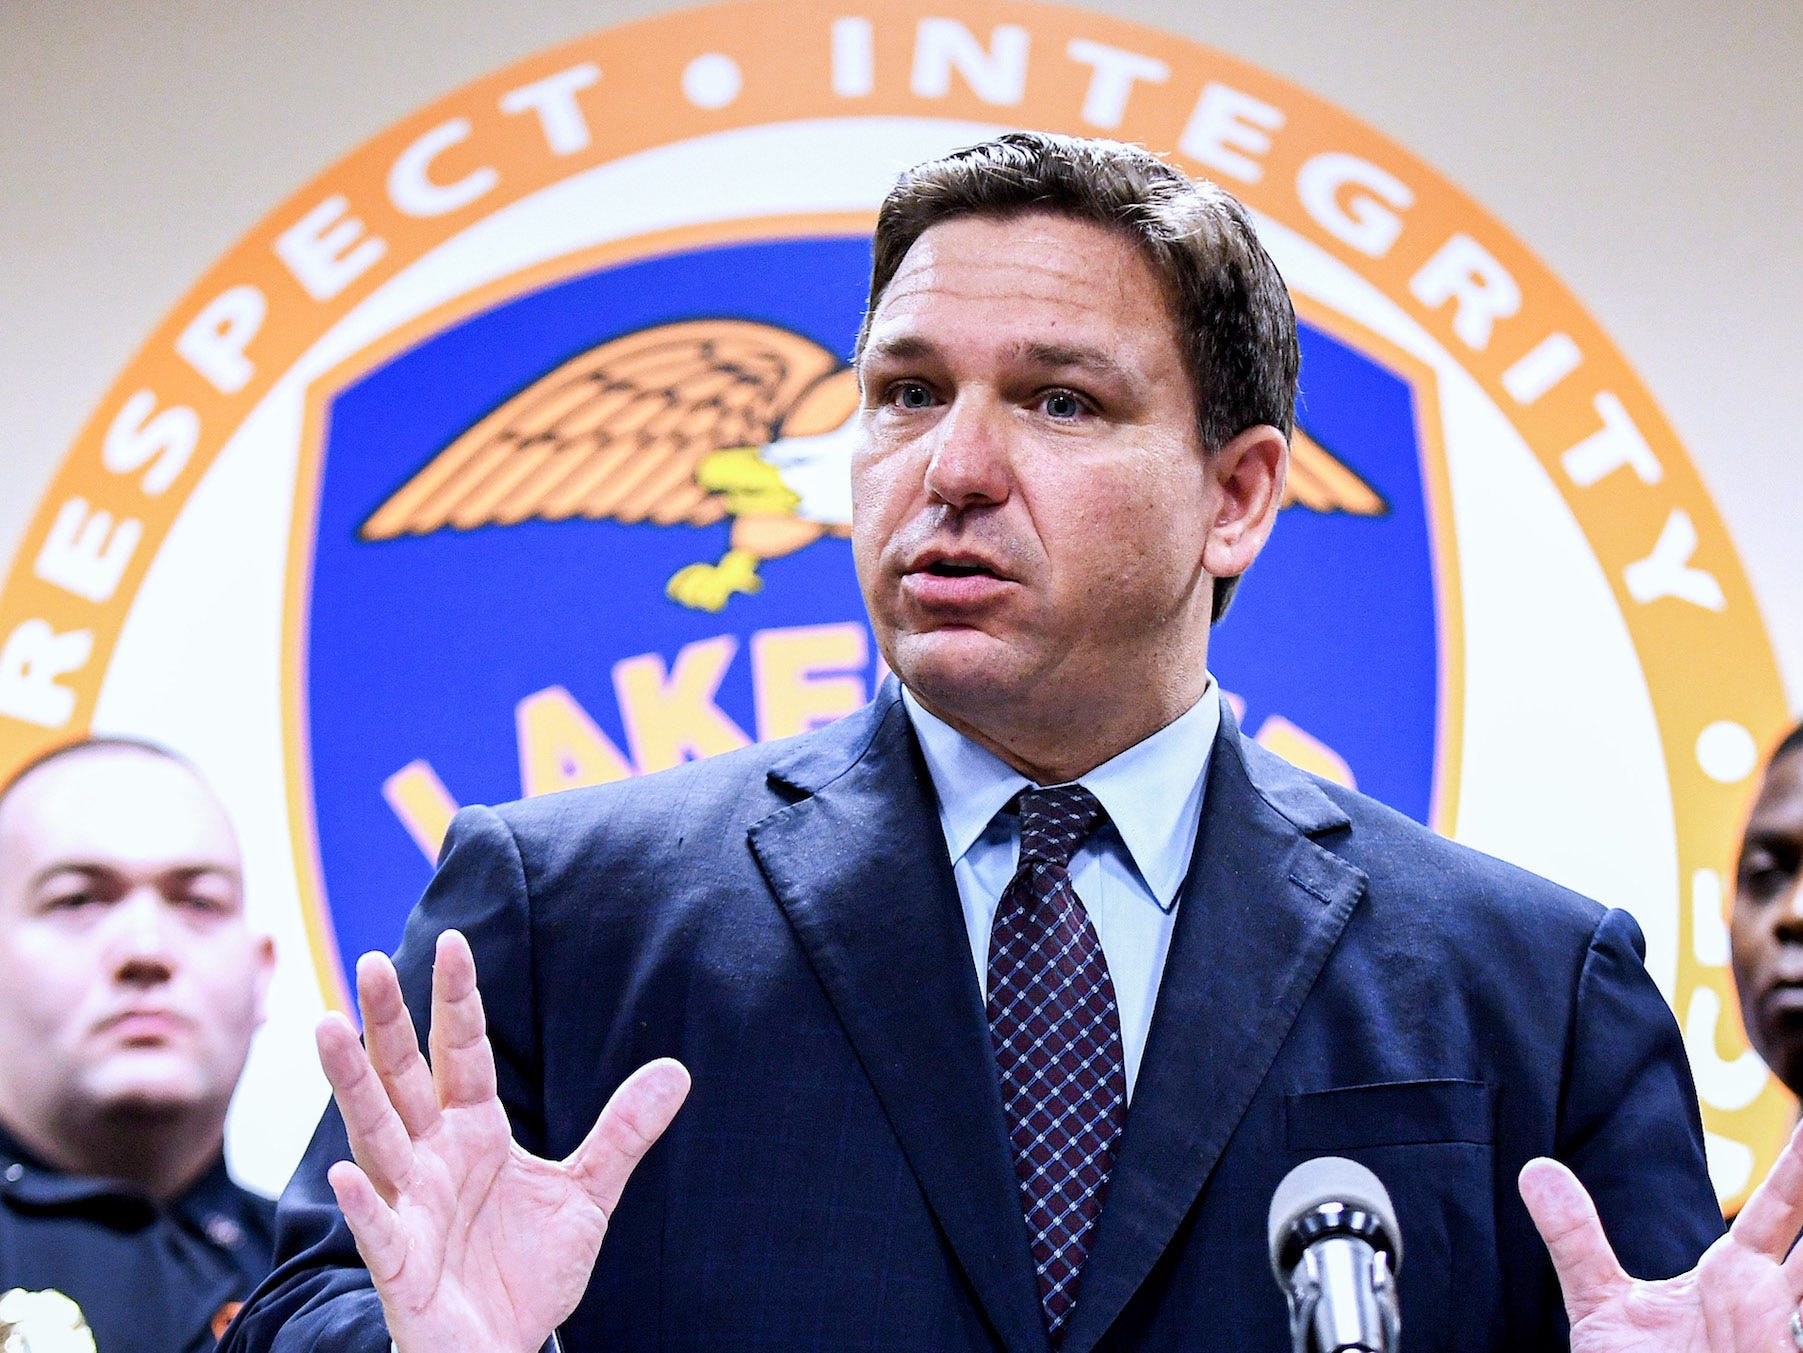 Florida Governor Ron DeSantis speaks at a press conference at the Lakeland, Florida Police Department.